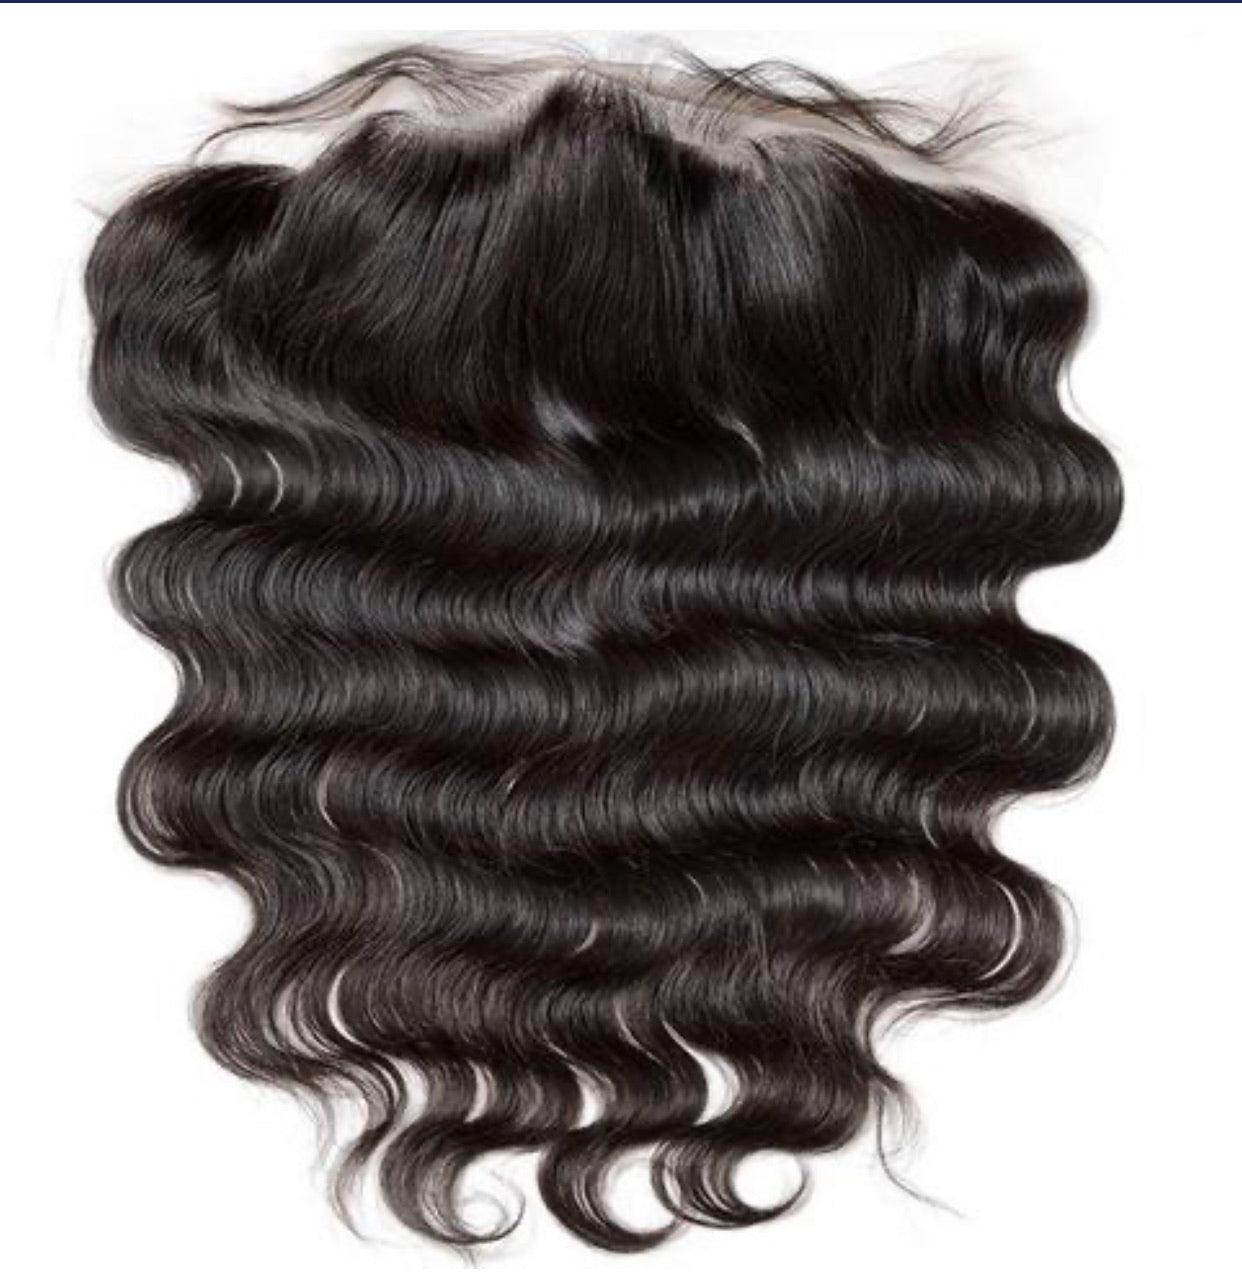 Lace Frontals 13x4 - Foreign Strandz Hair Co.